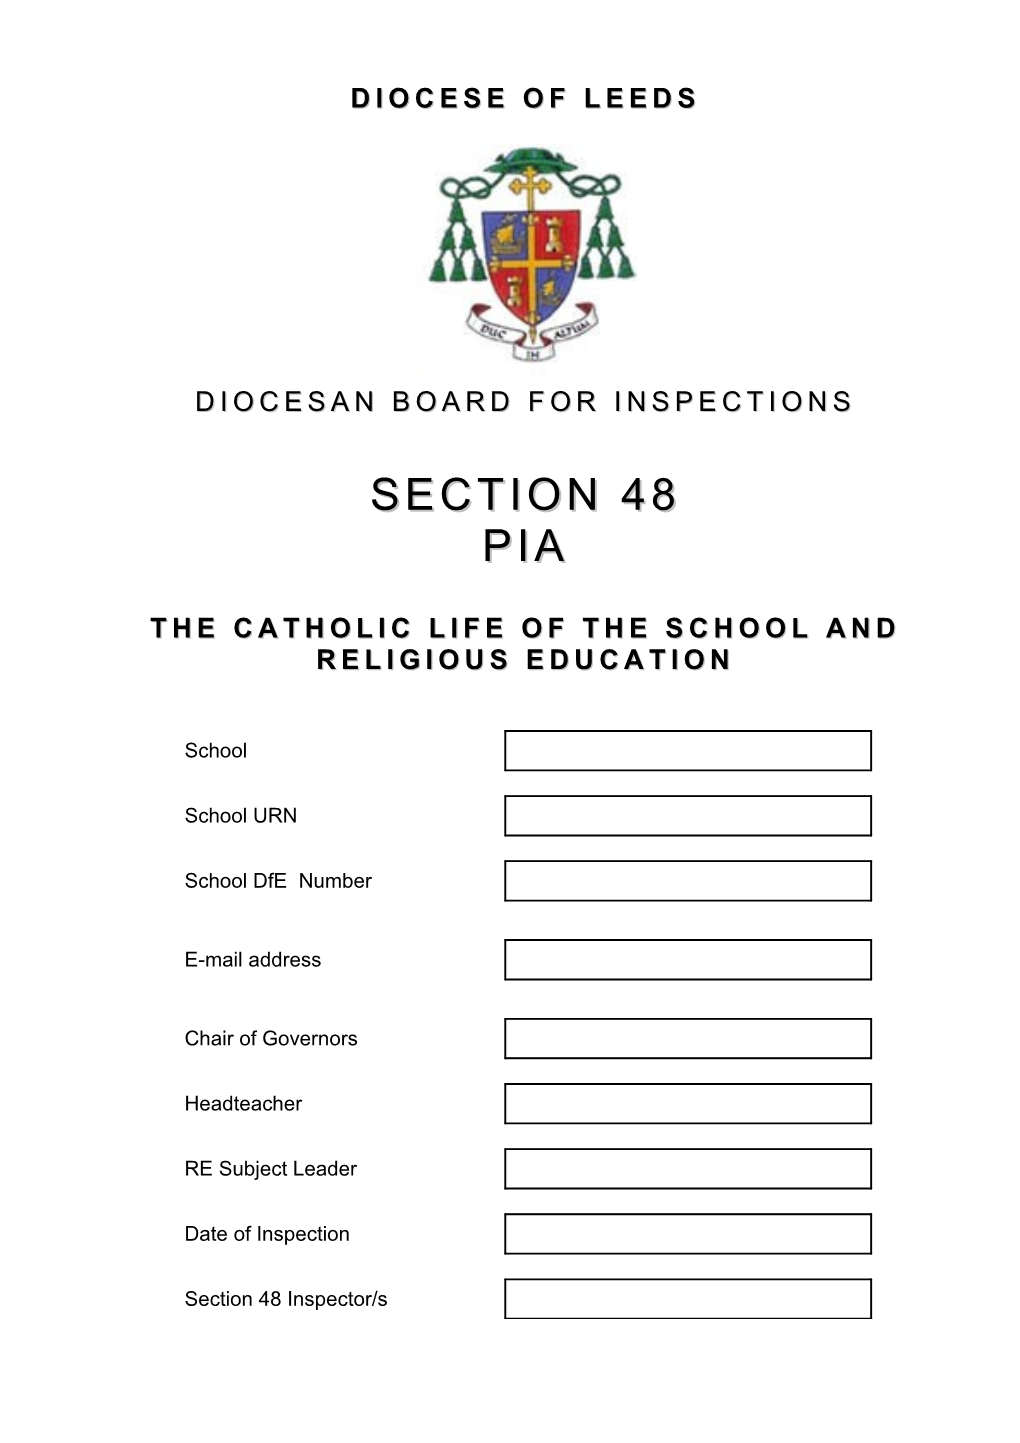 The Catholic Life of the School and Religious EDUCATION